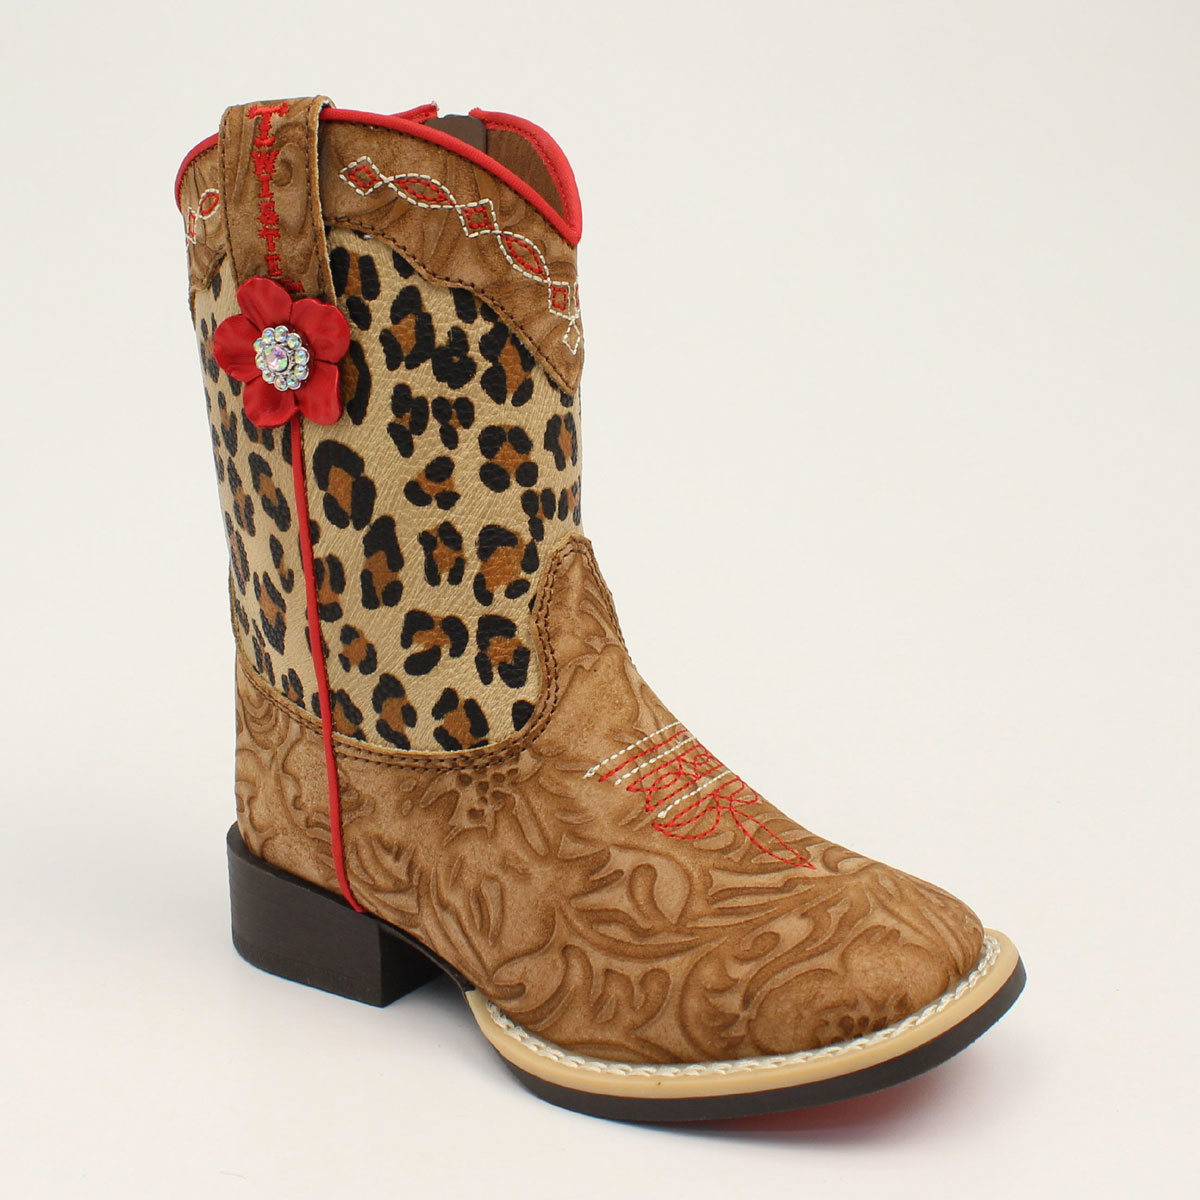 Twister Toddler Girls Avery Western Boots - Leopard Print/Tan